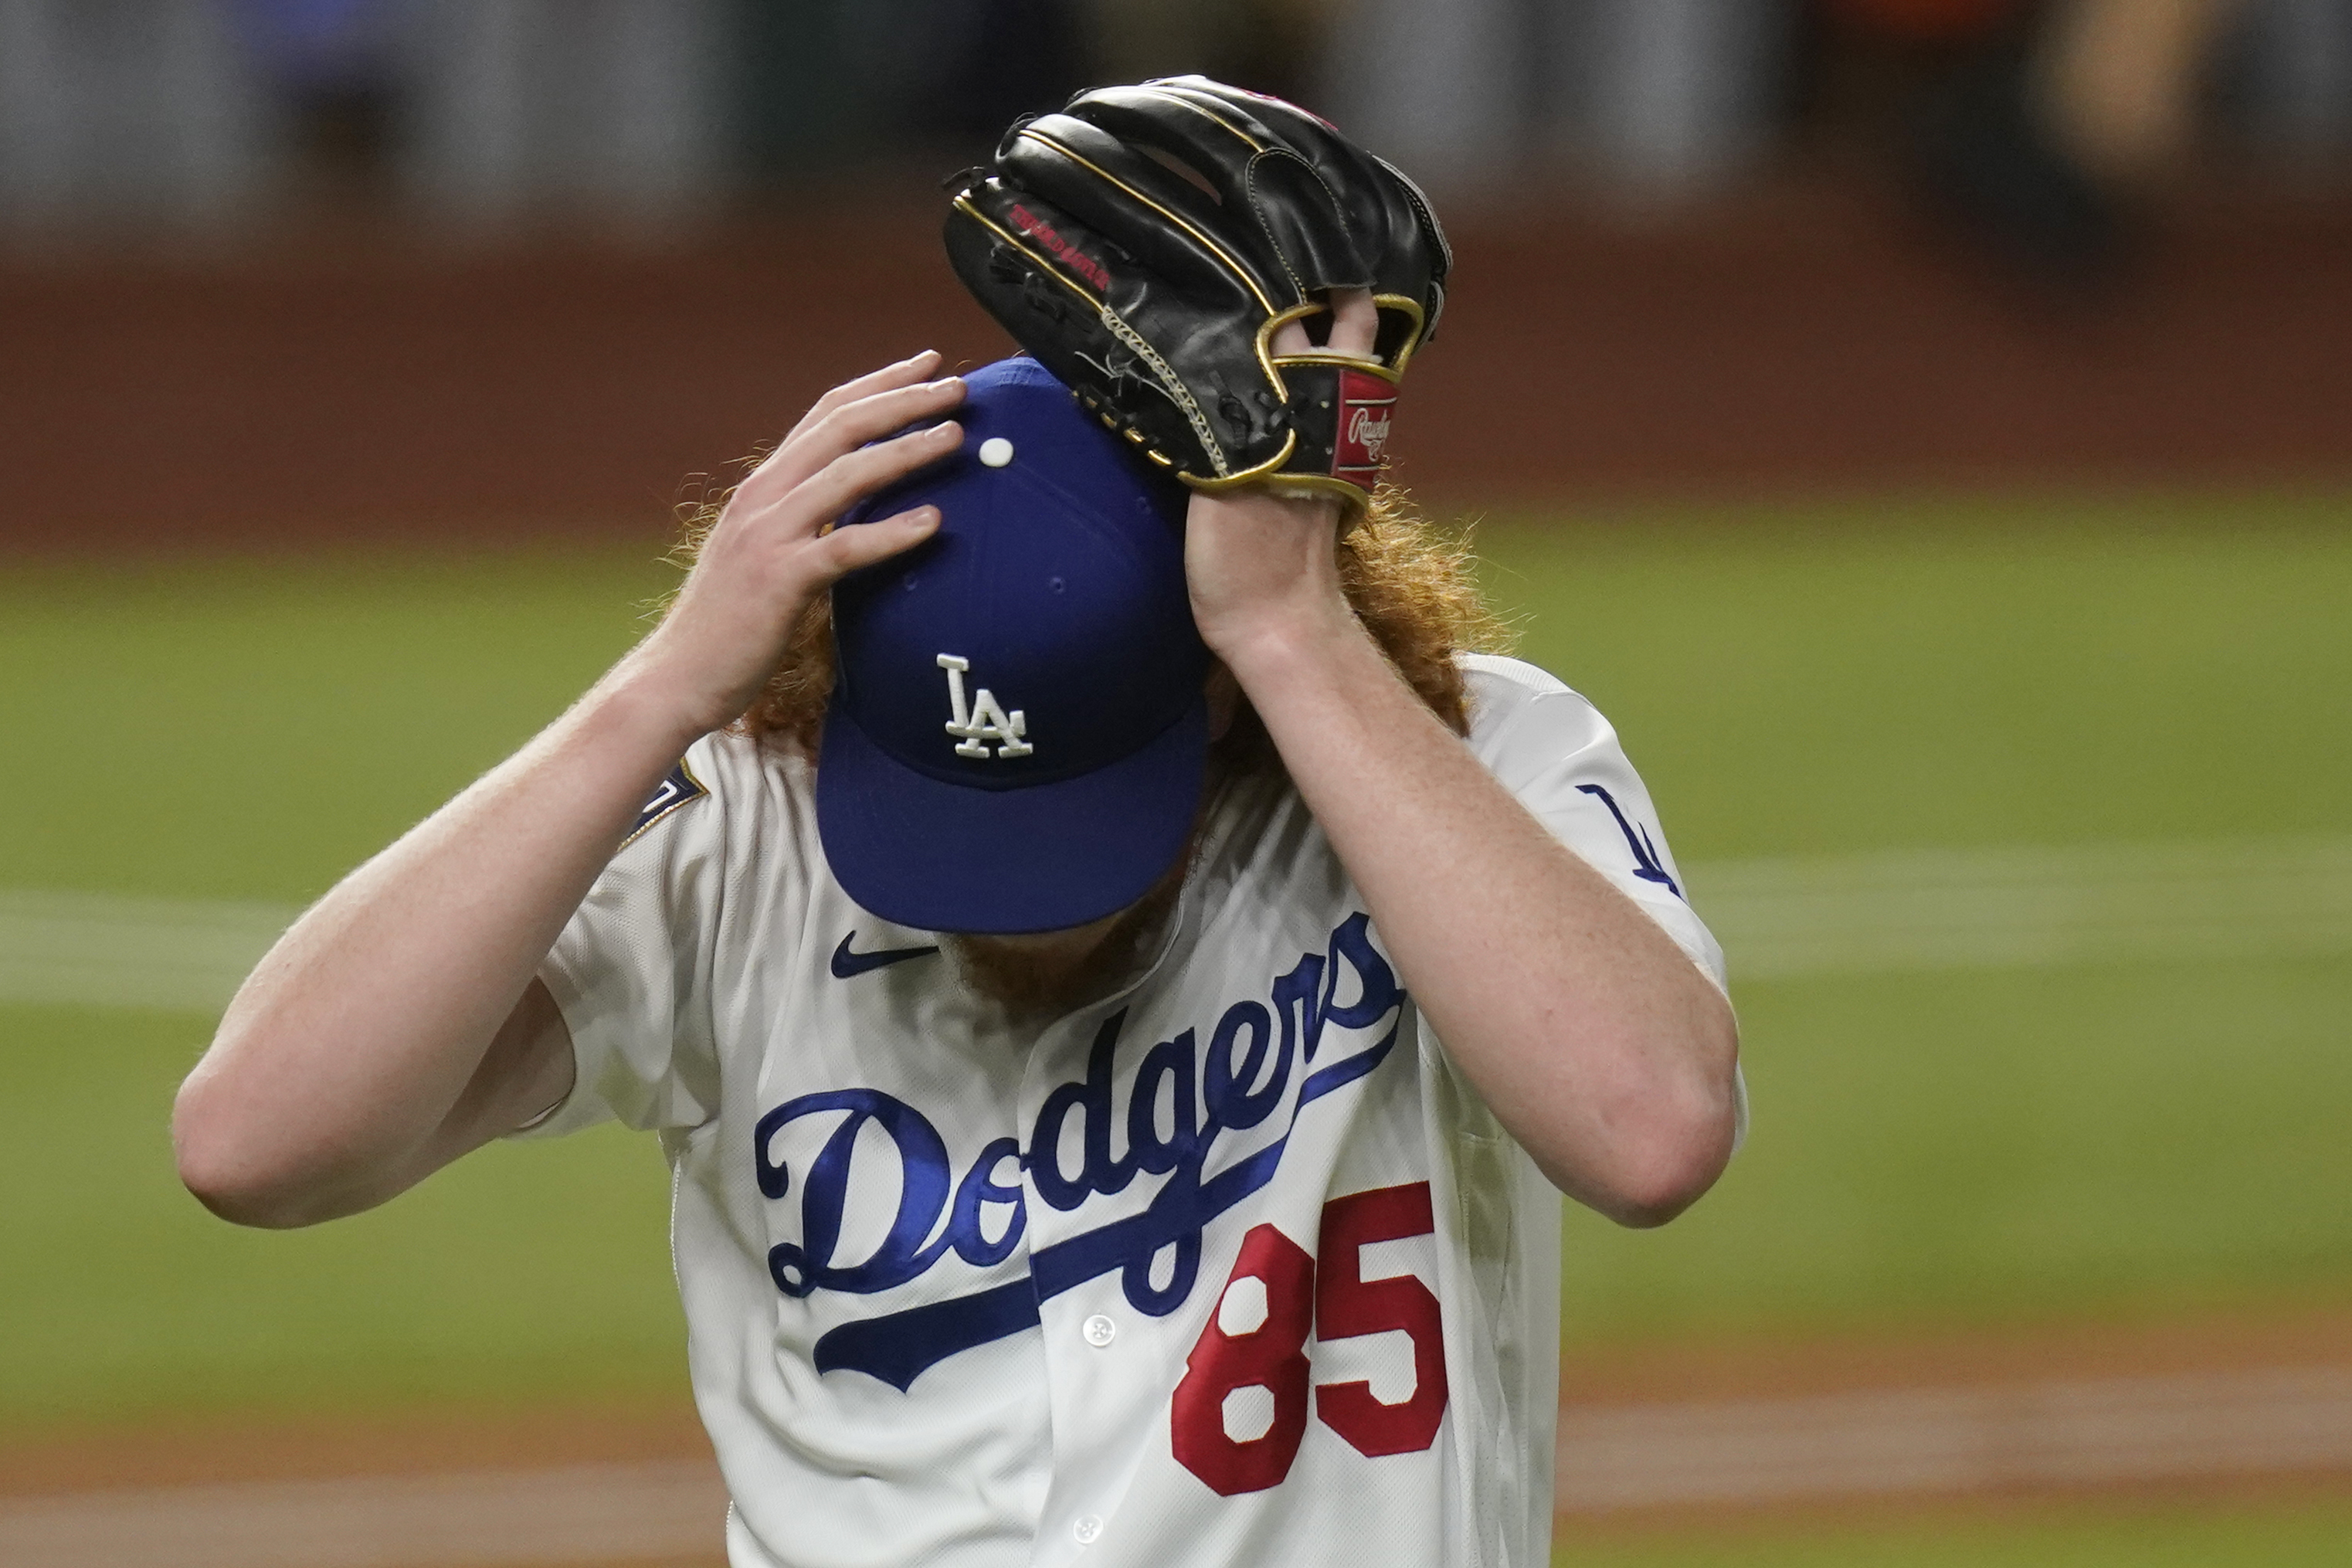 Kershaw, Dodgers Look For Series Win On Throwback Uniform Day At